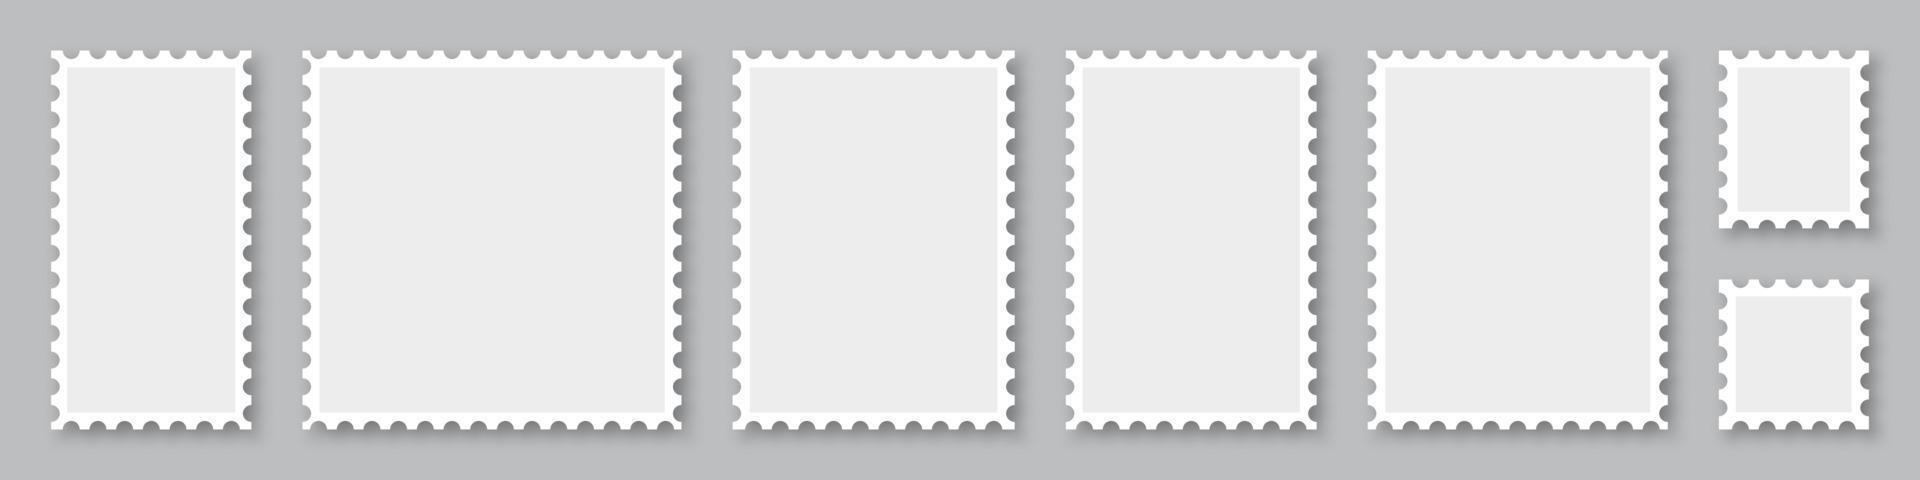 Blank postage stamps frames set. Mockup postage stamps with shadow. Postage stamp borders template collection. Realistic post stamps set. Vector illustration